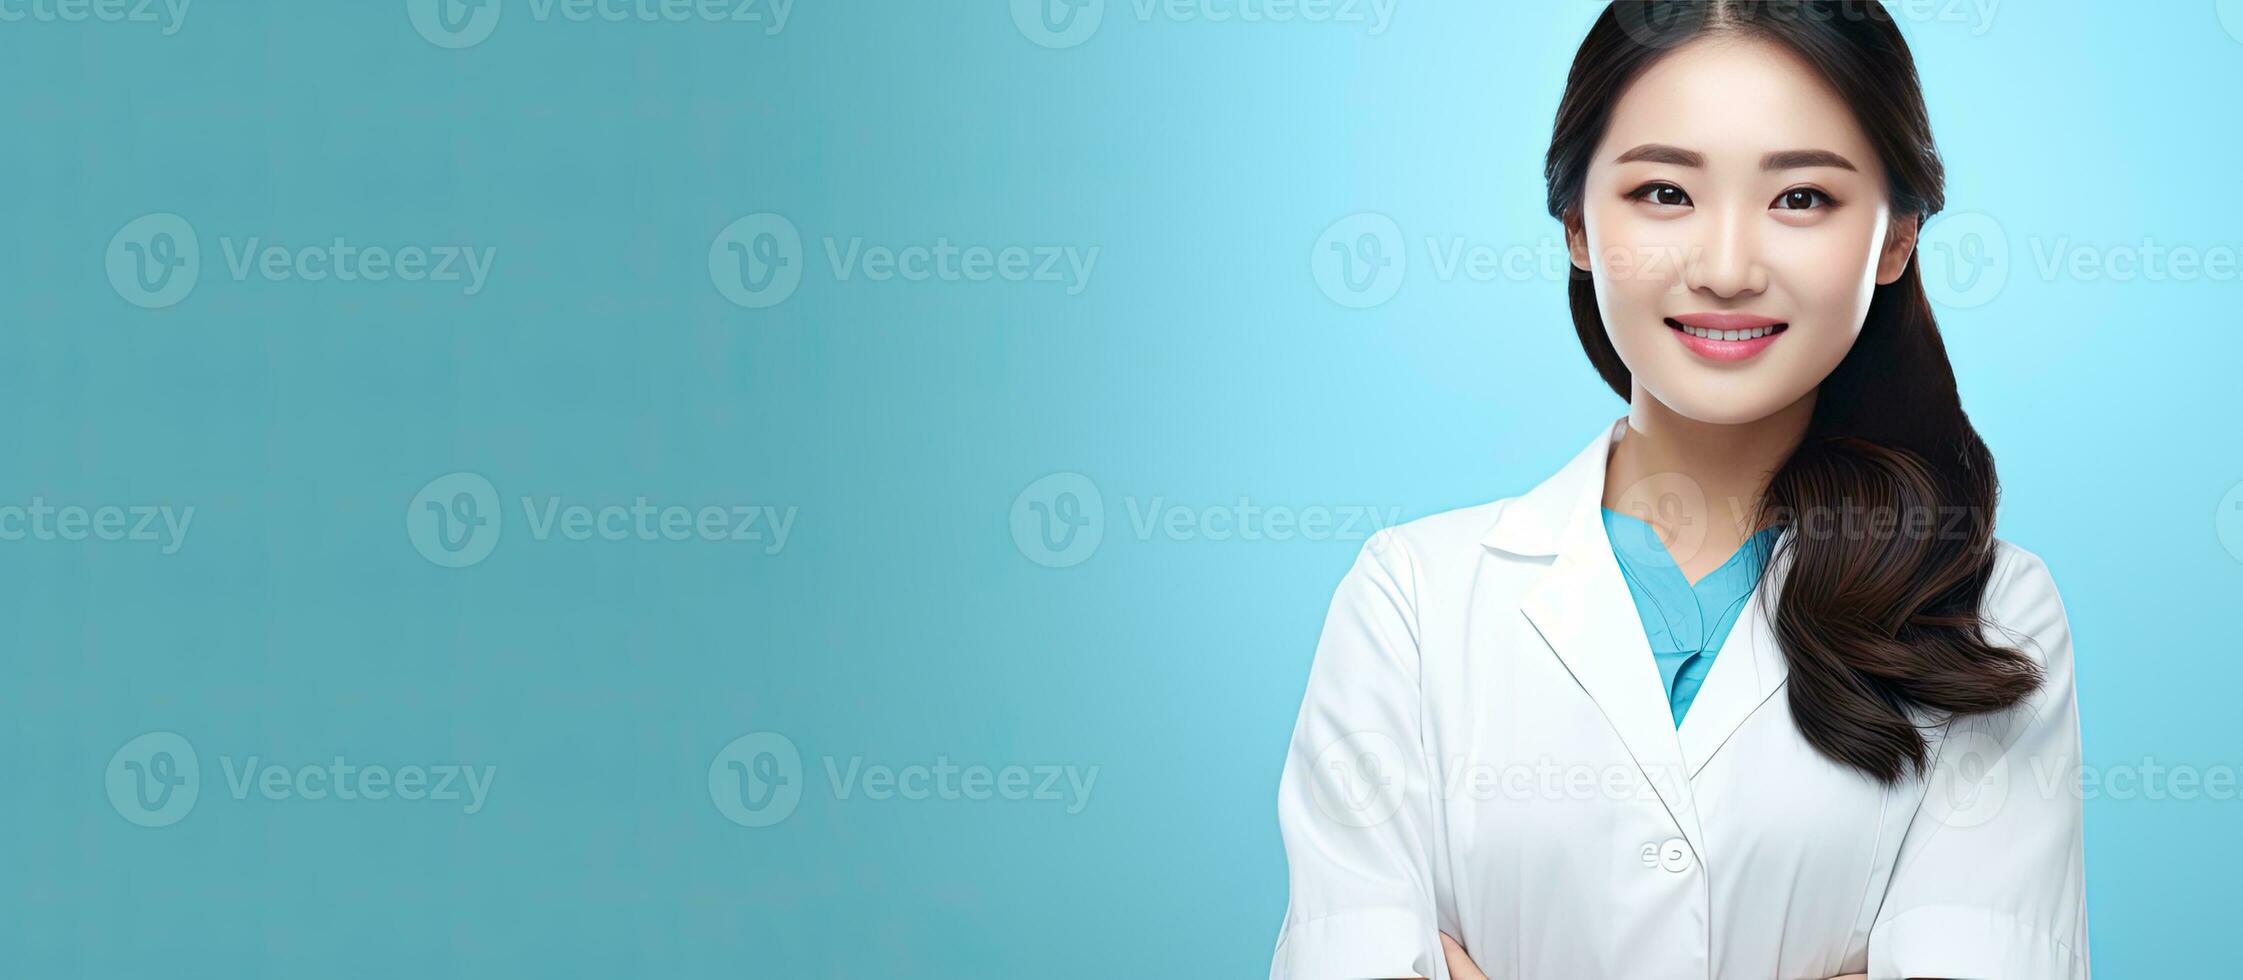 Portrait of a young Asian doctor with a blank board on a blue background a concept of healthcare in a medical setting photo